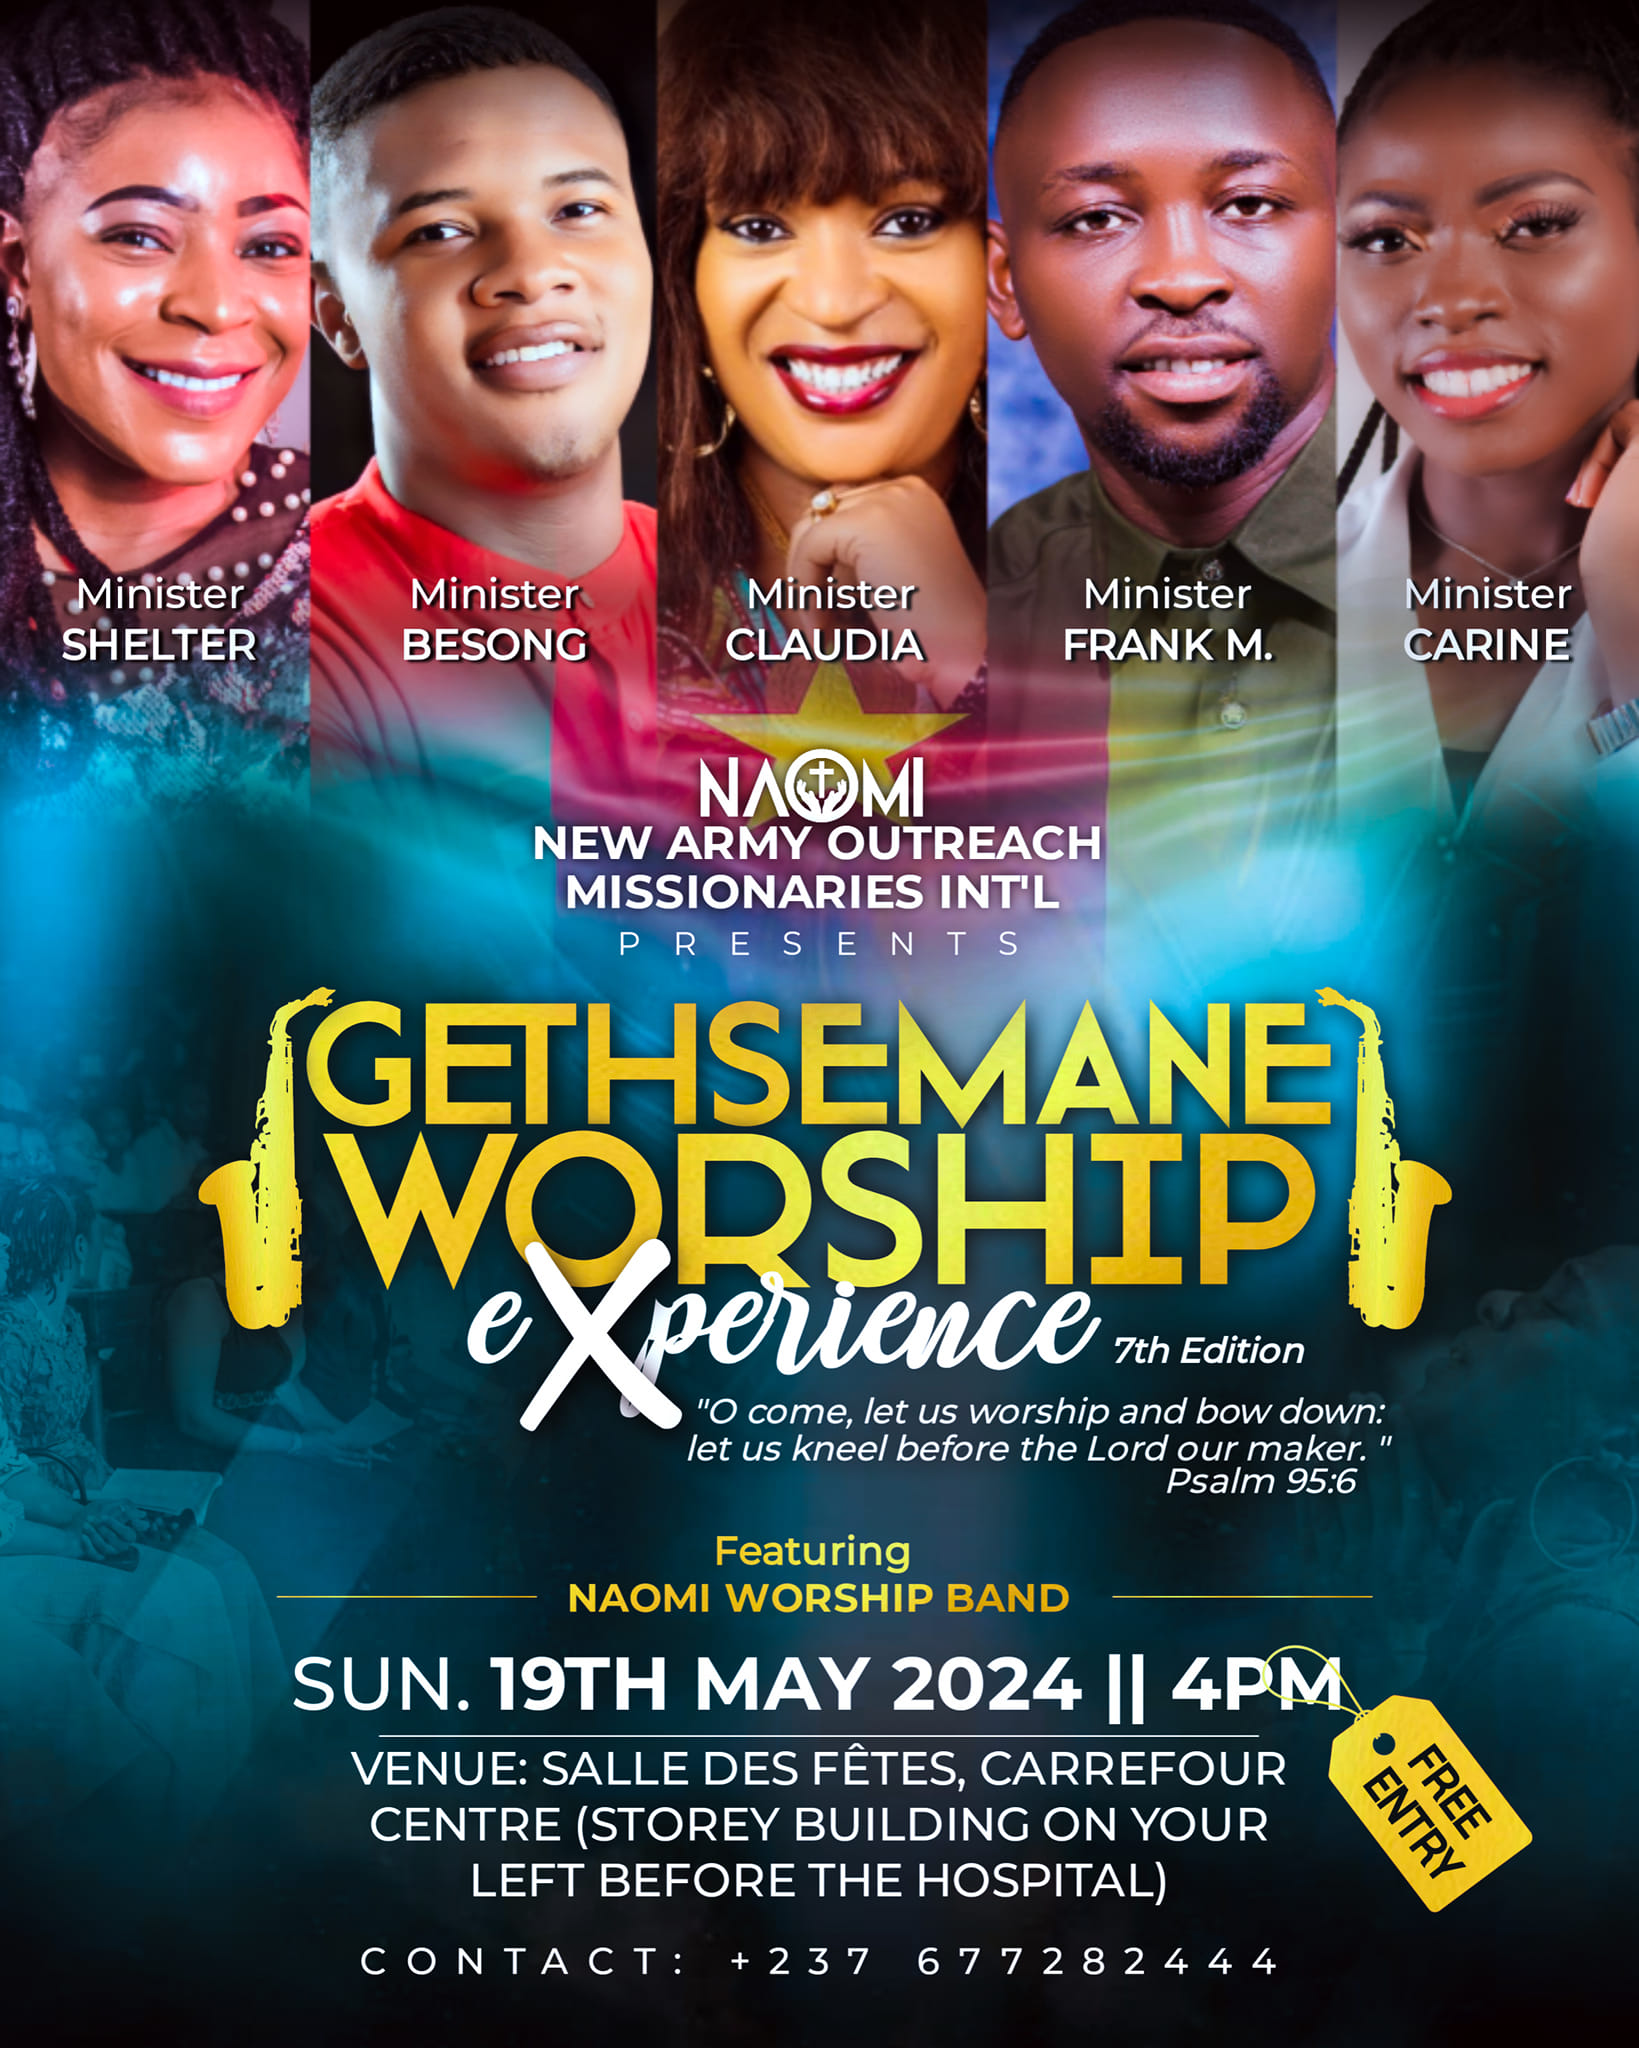 7th  edition of Gethsemane Worship Experience